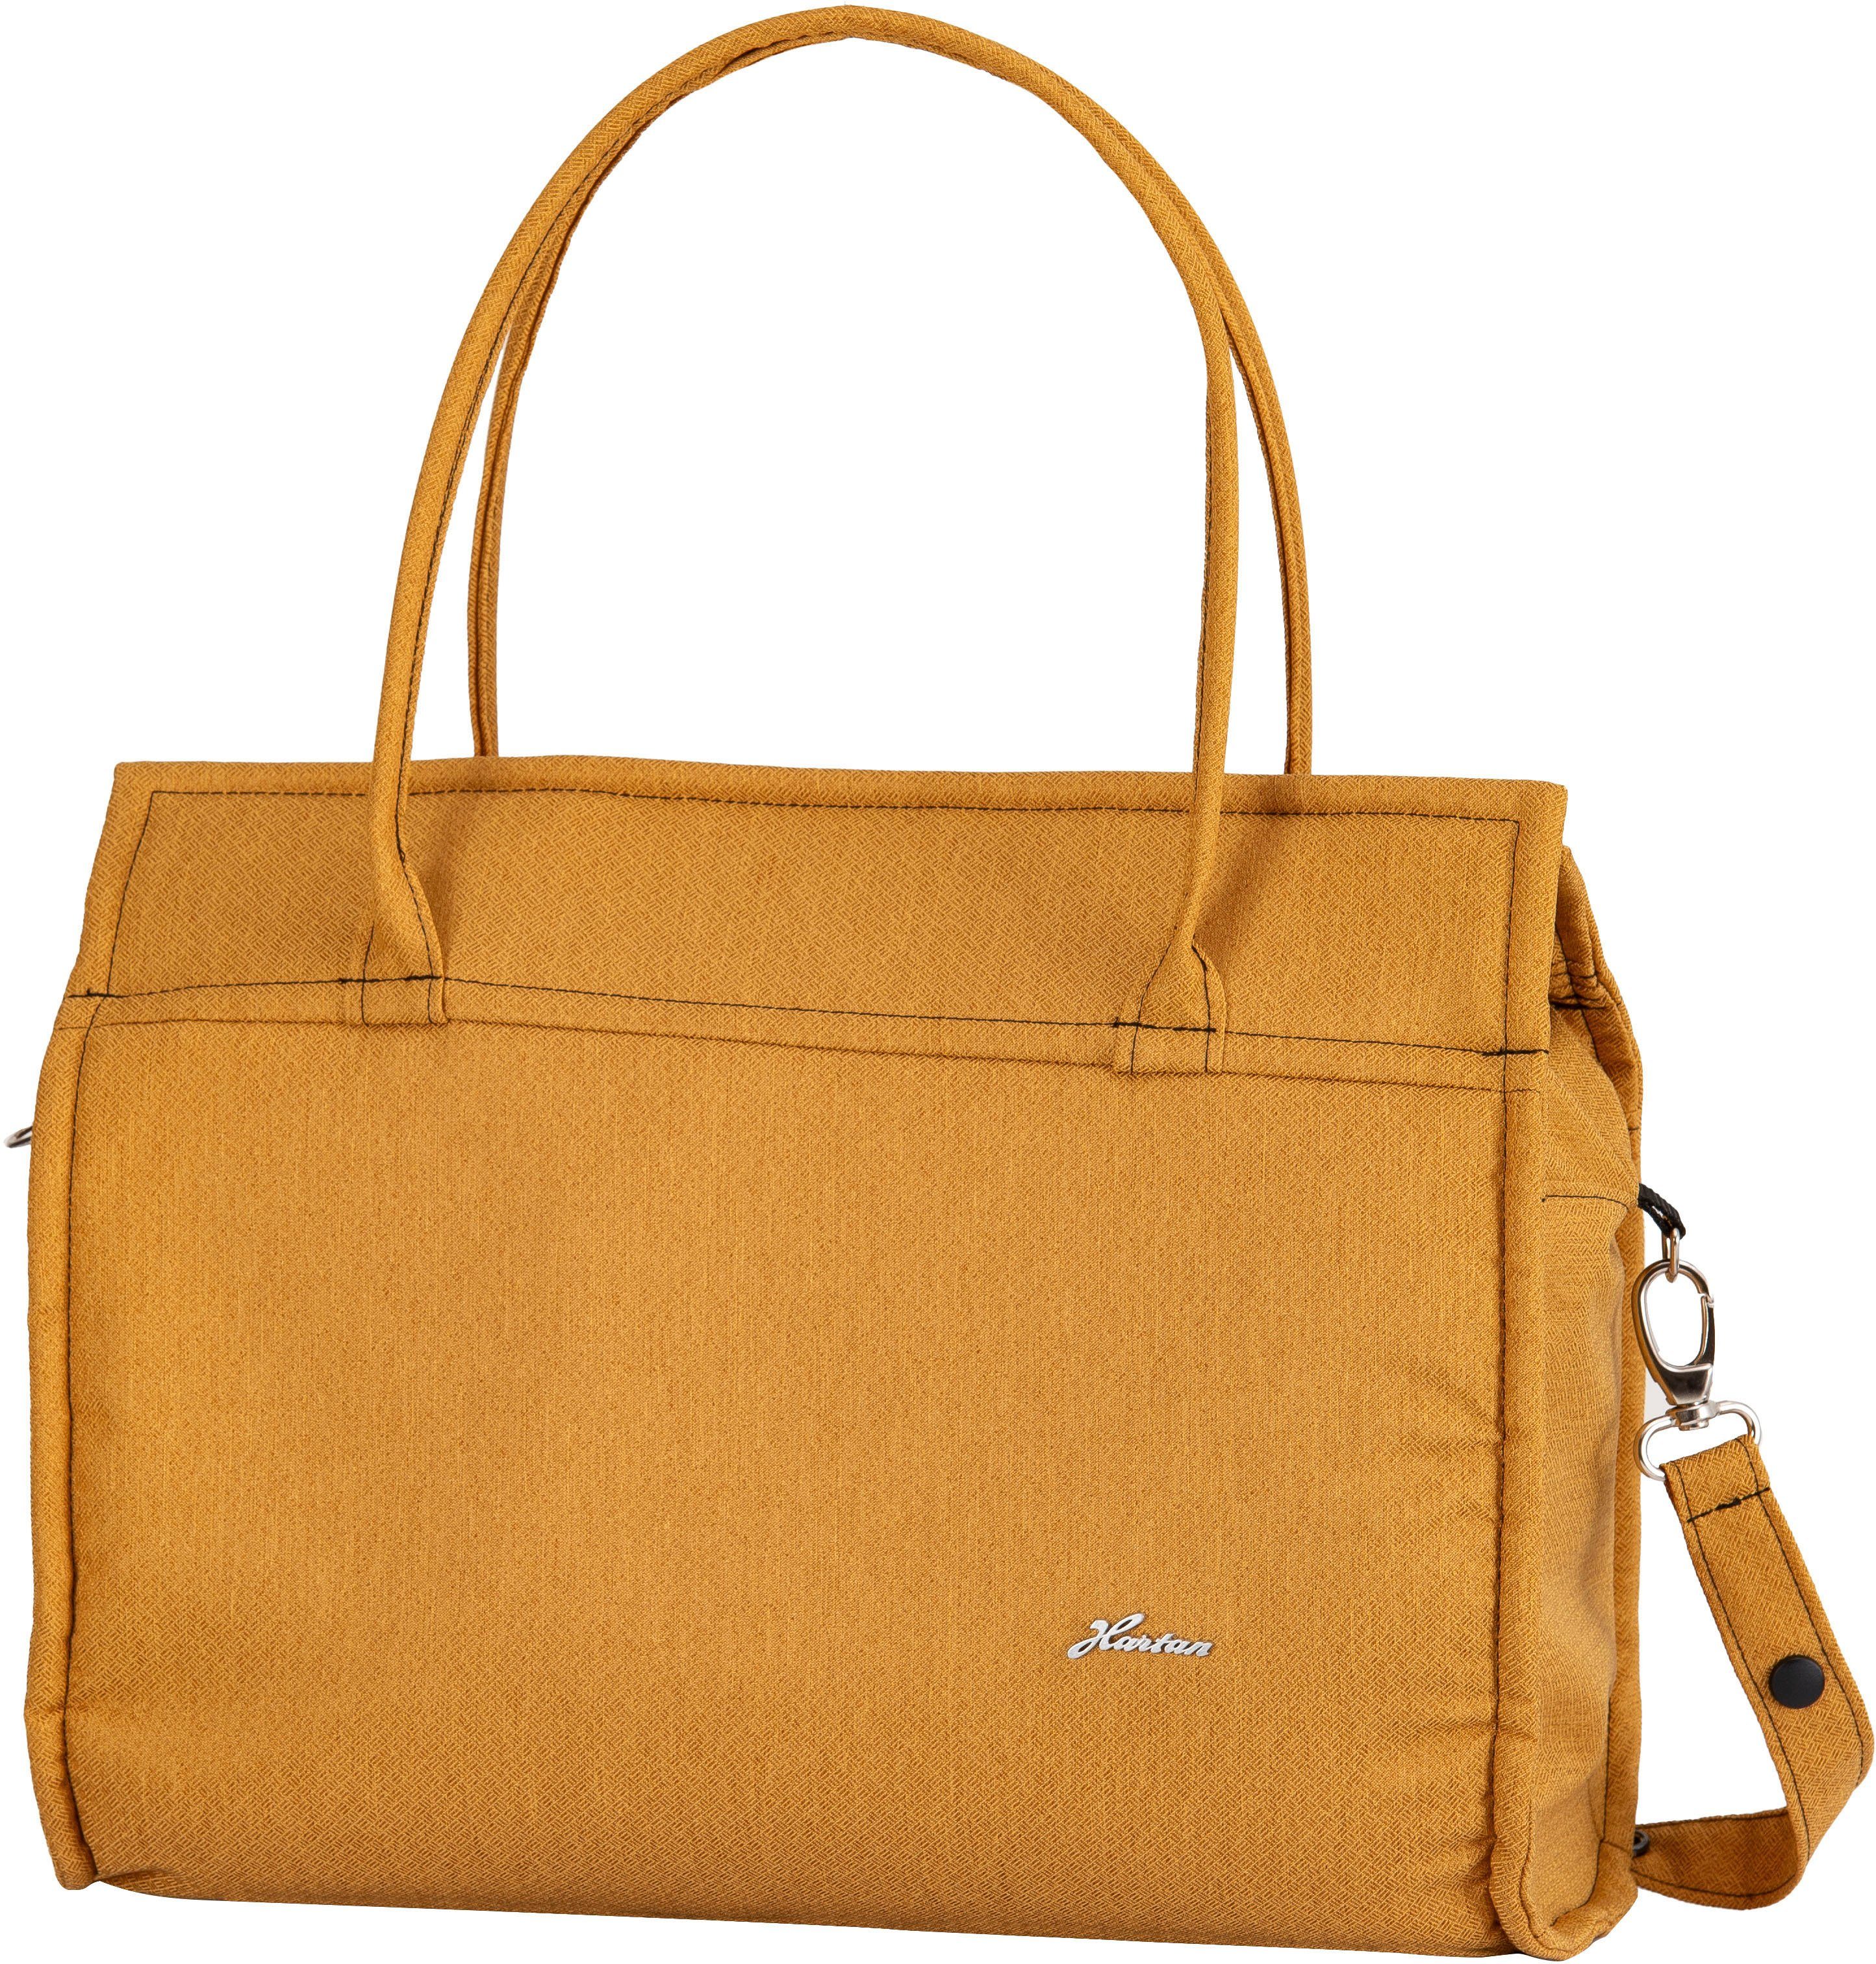 Hartan Wickeltasche Casual bag - Casual Collection, Made in Germany forest friends